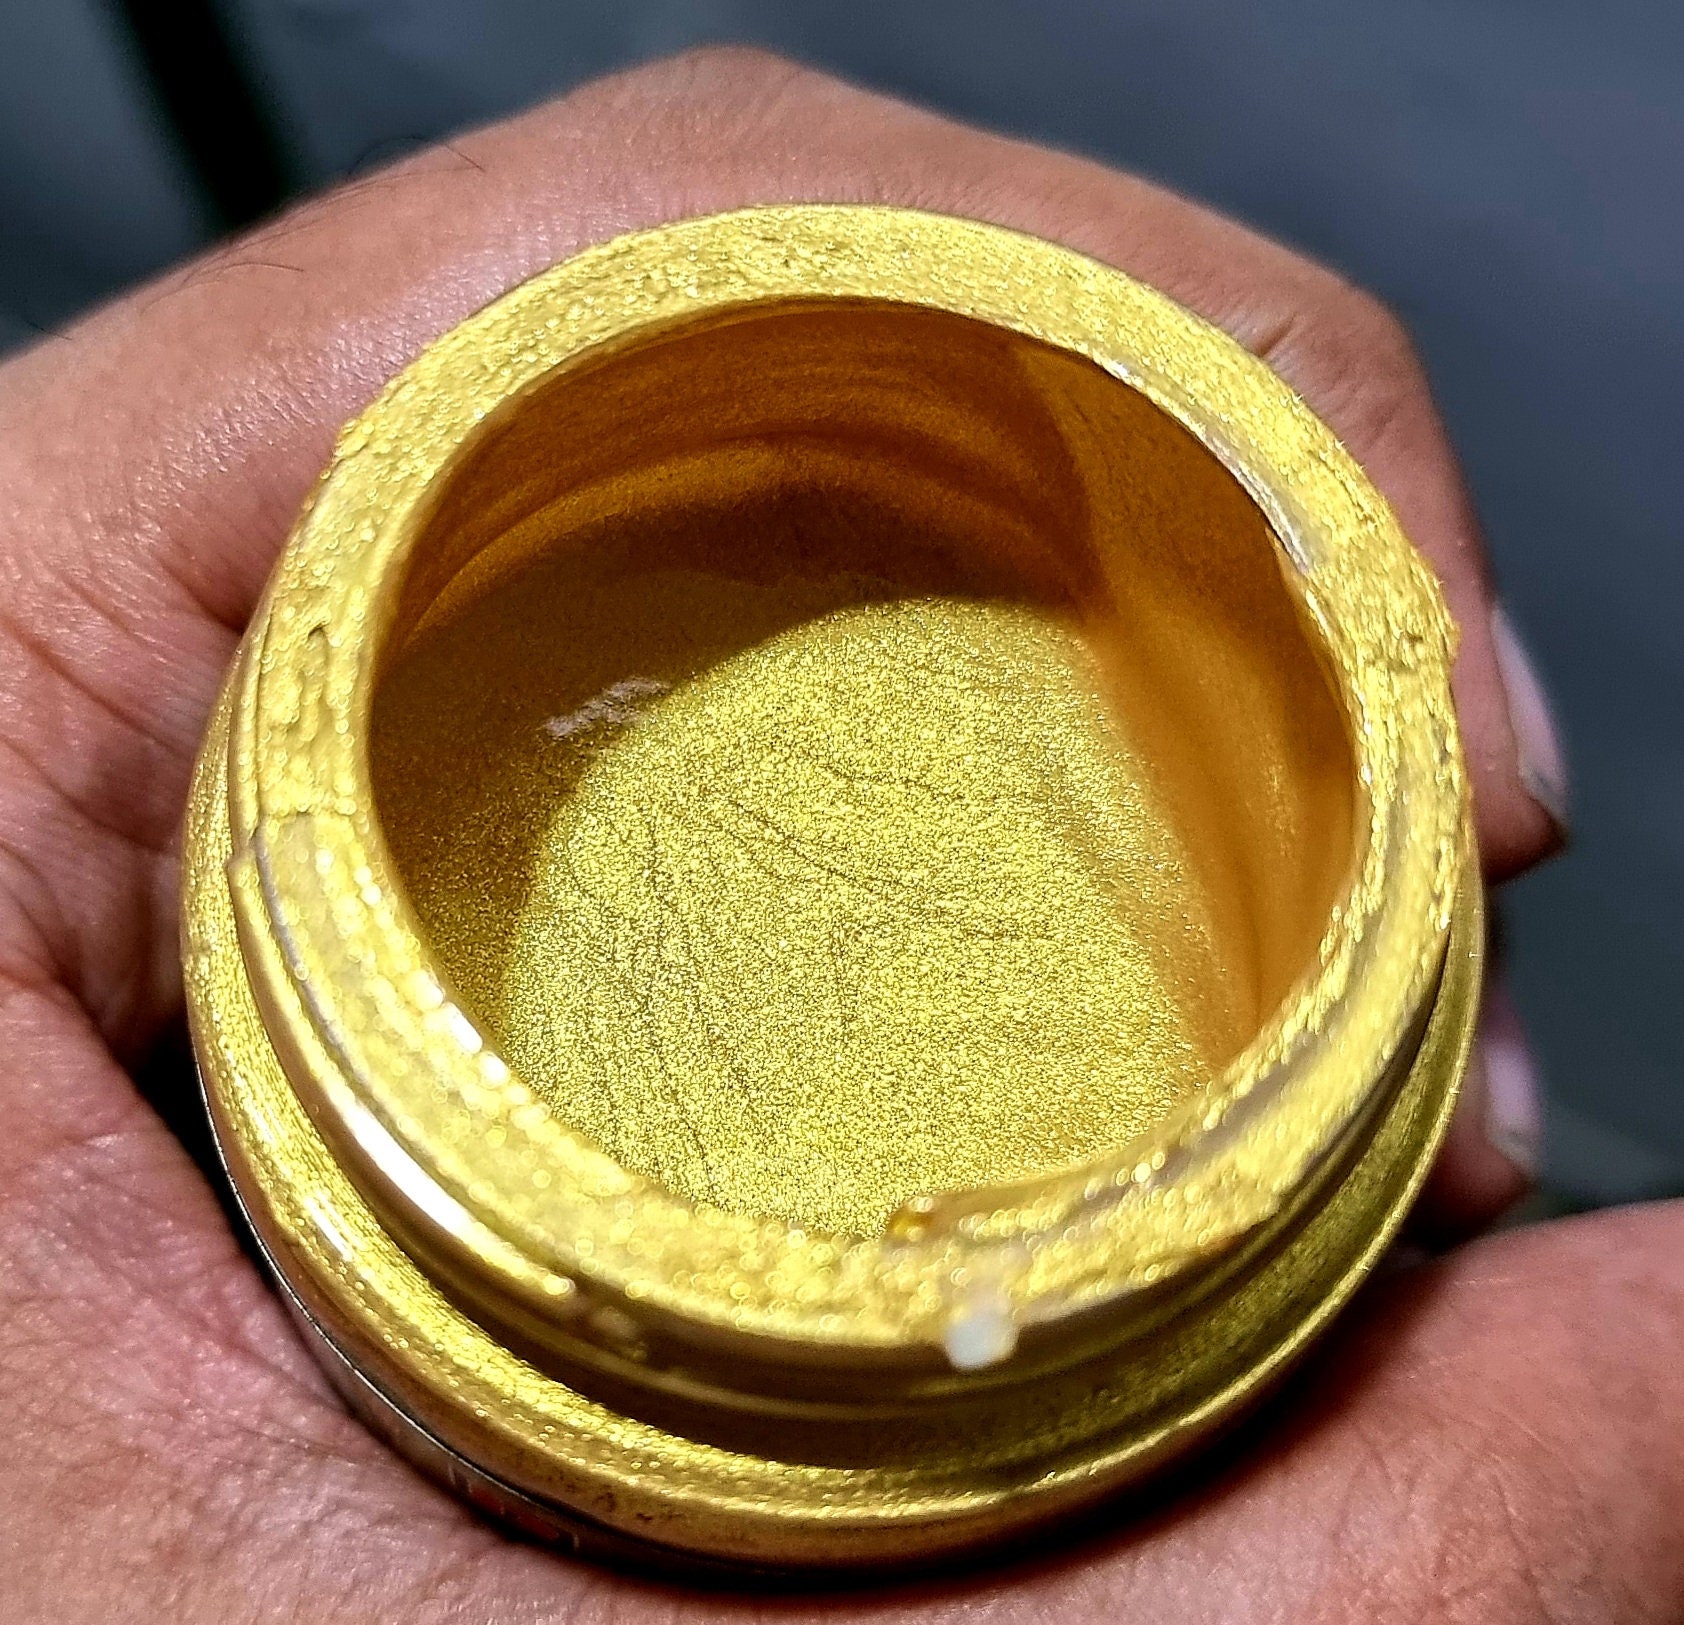 Teissuly Water-Based Glitter Bronzing Paint,Super Bright Gold Foil Paint, Golden Acrylic Paint Gold Paint for All Surfaces,Wood,Metal Statue Coloring  